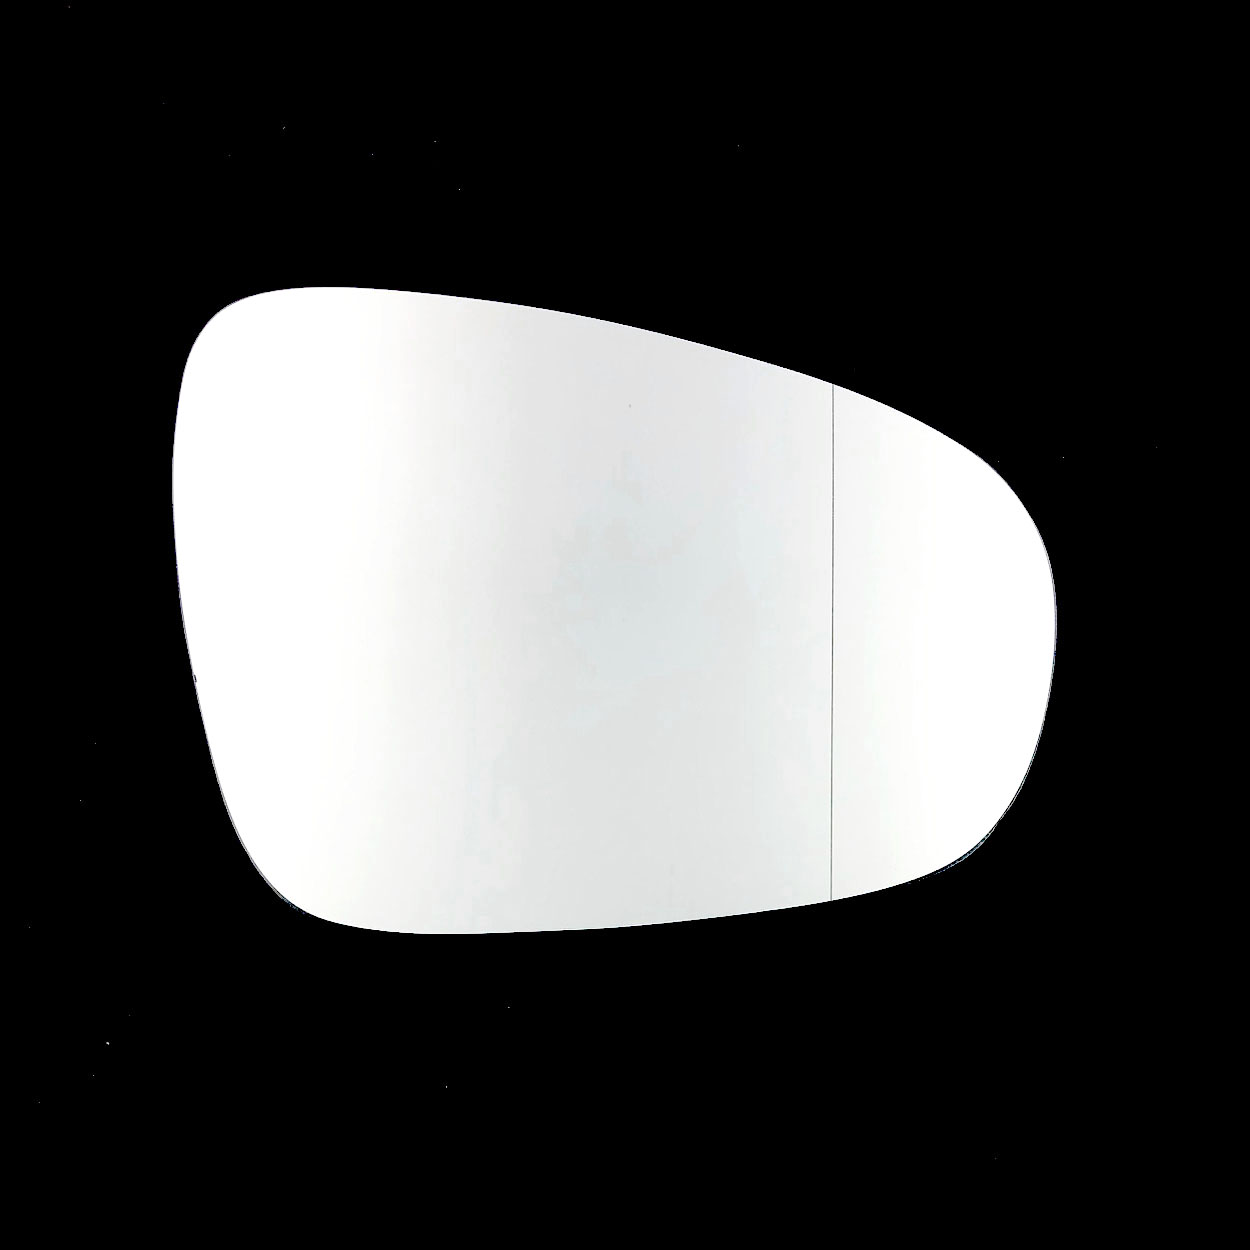 Land Rover Discovery Wing Mirror Glass RIGHT HAND ( UK Driver Side ) 2002 to 2004 – Convex Wing Mirror